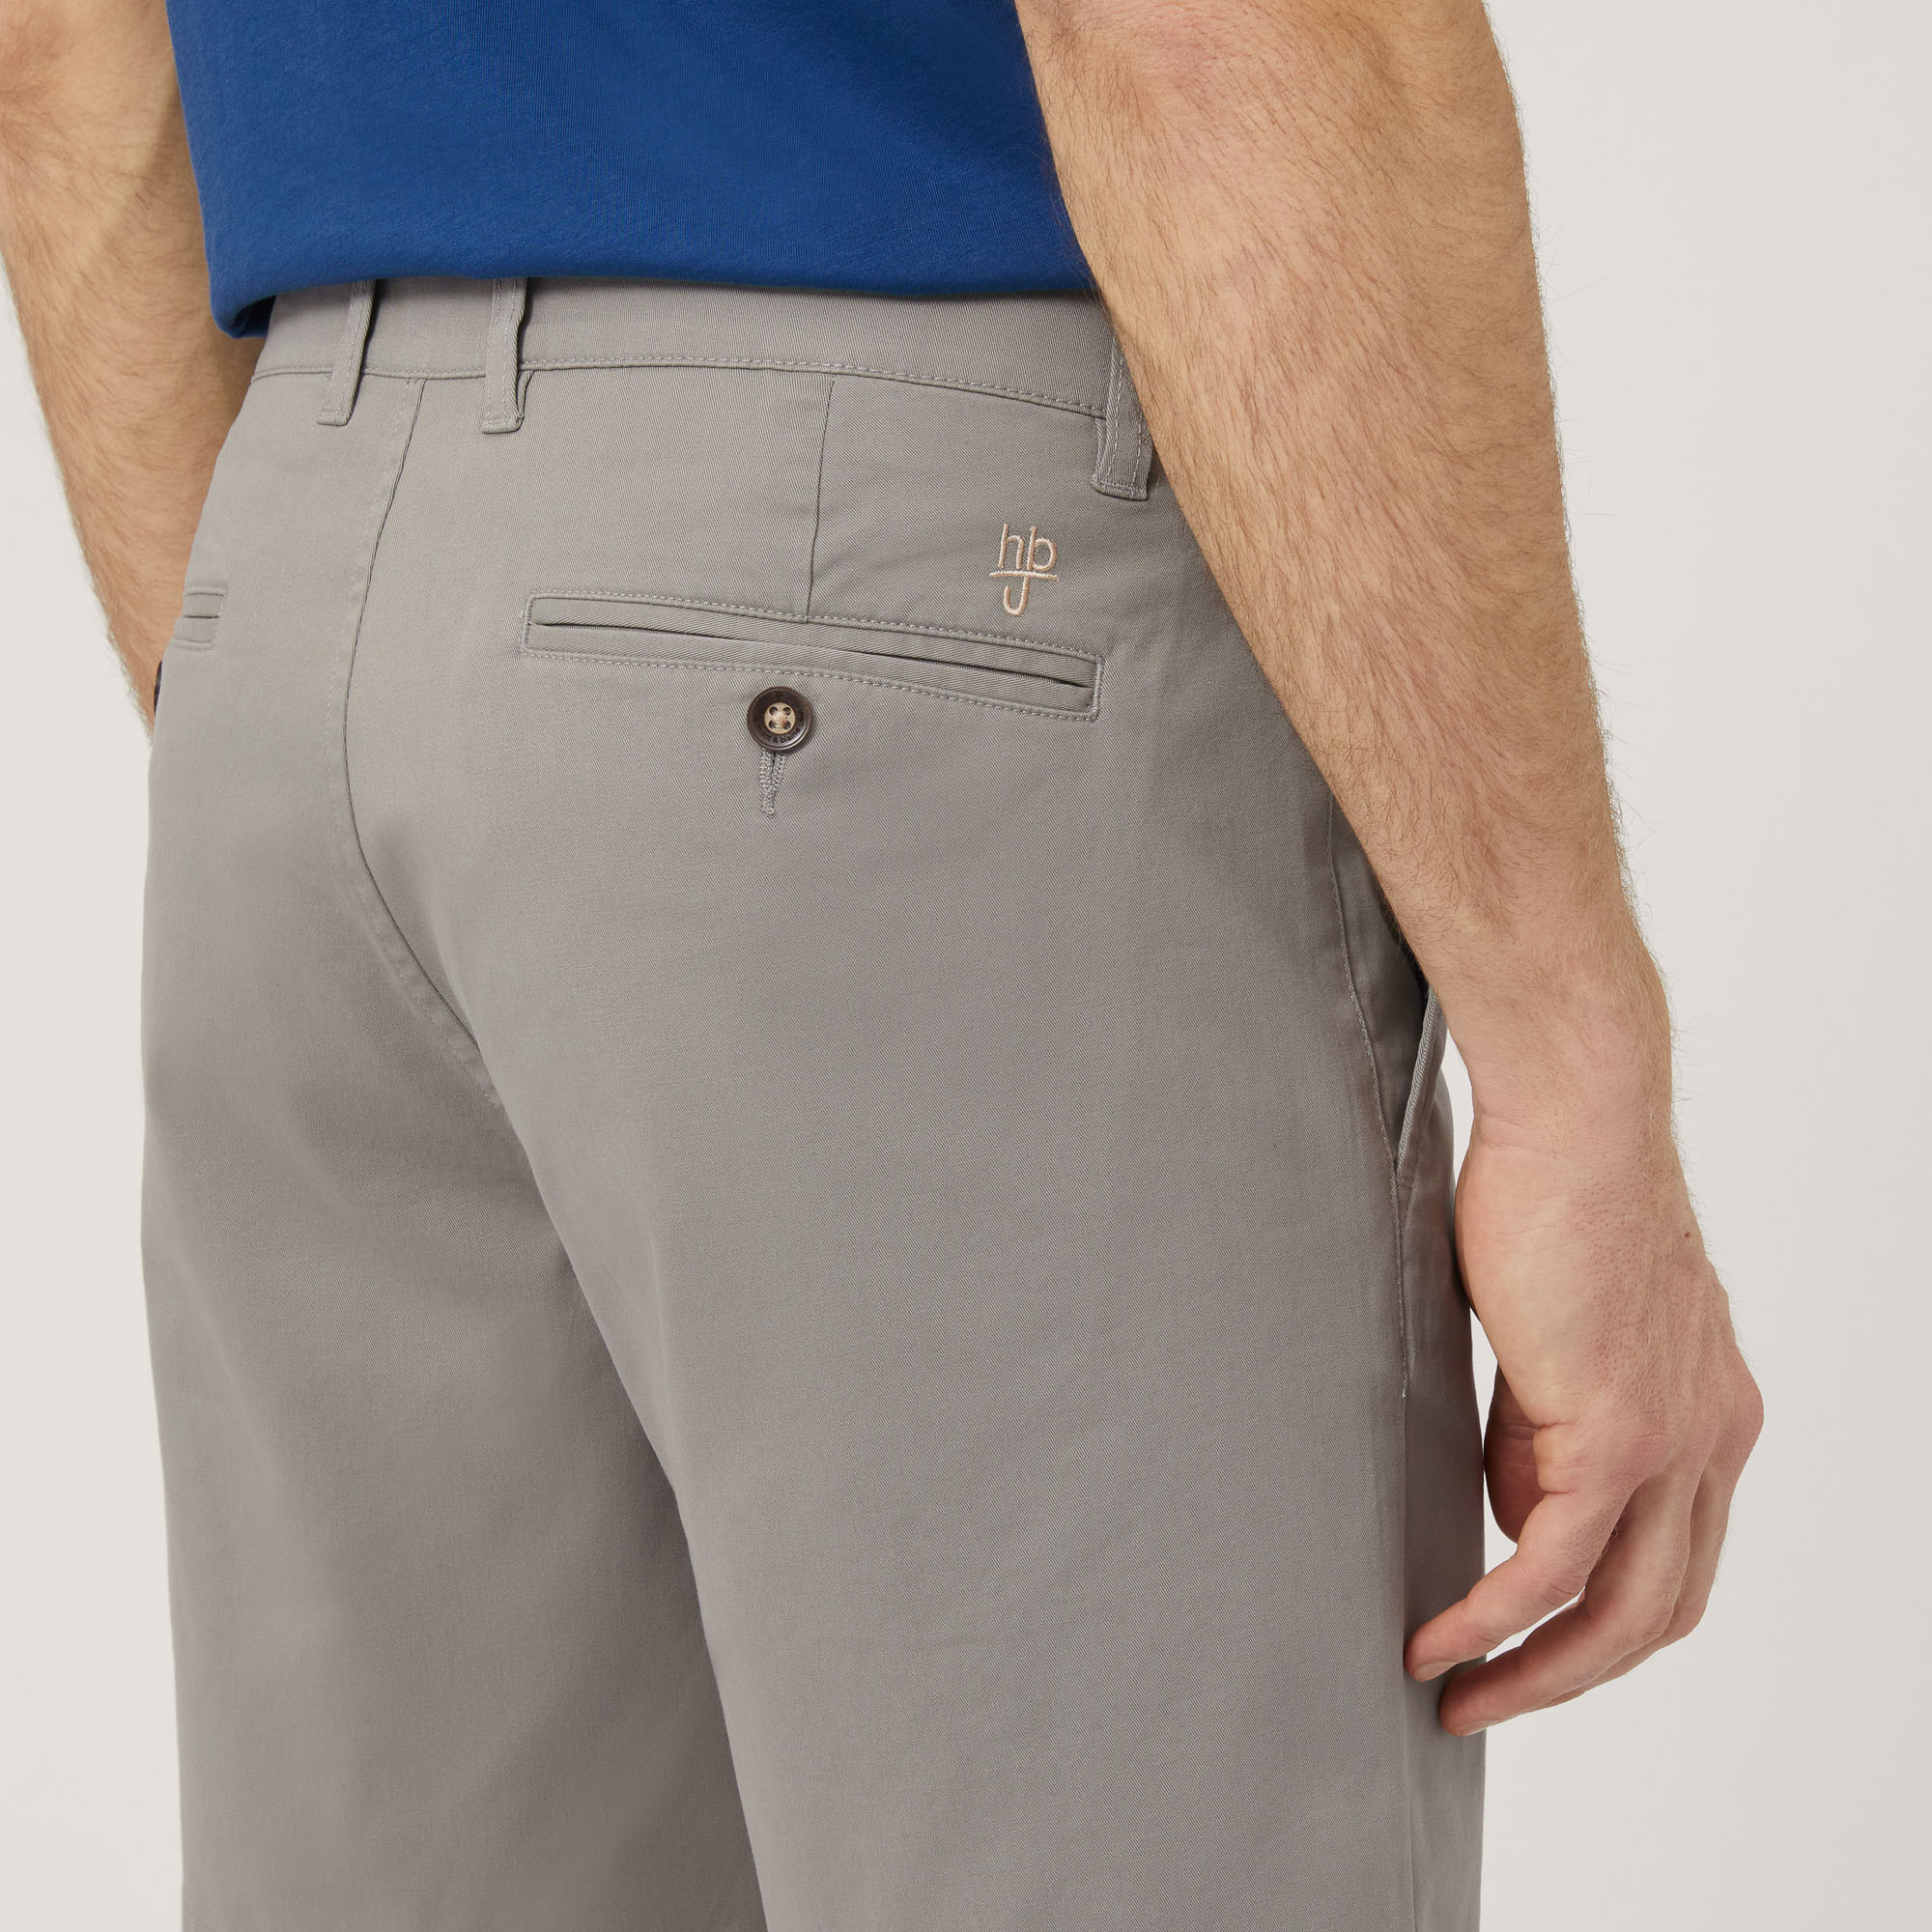 Bermuda Chino In Twill, Verde, large image number 2